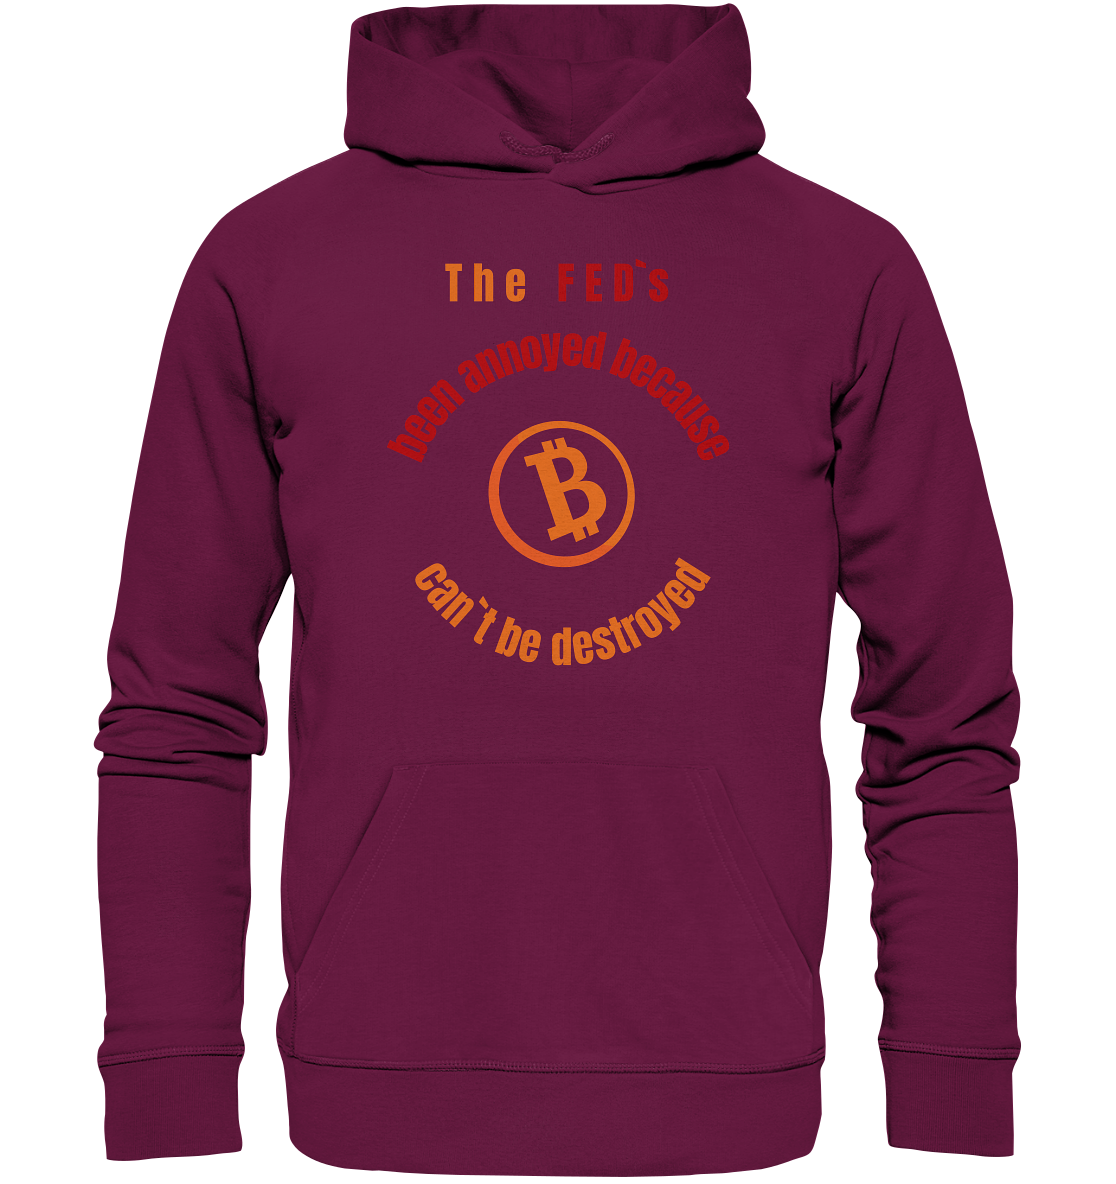 The FEDs been annoyed, BTC cant be destroyed - Premium Unisex Hoodie